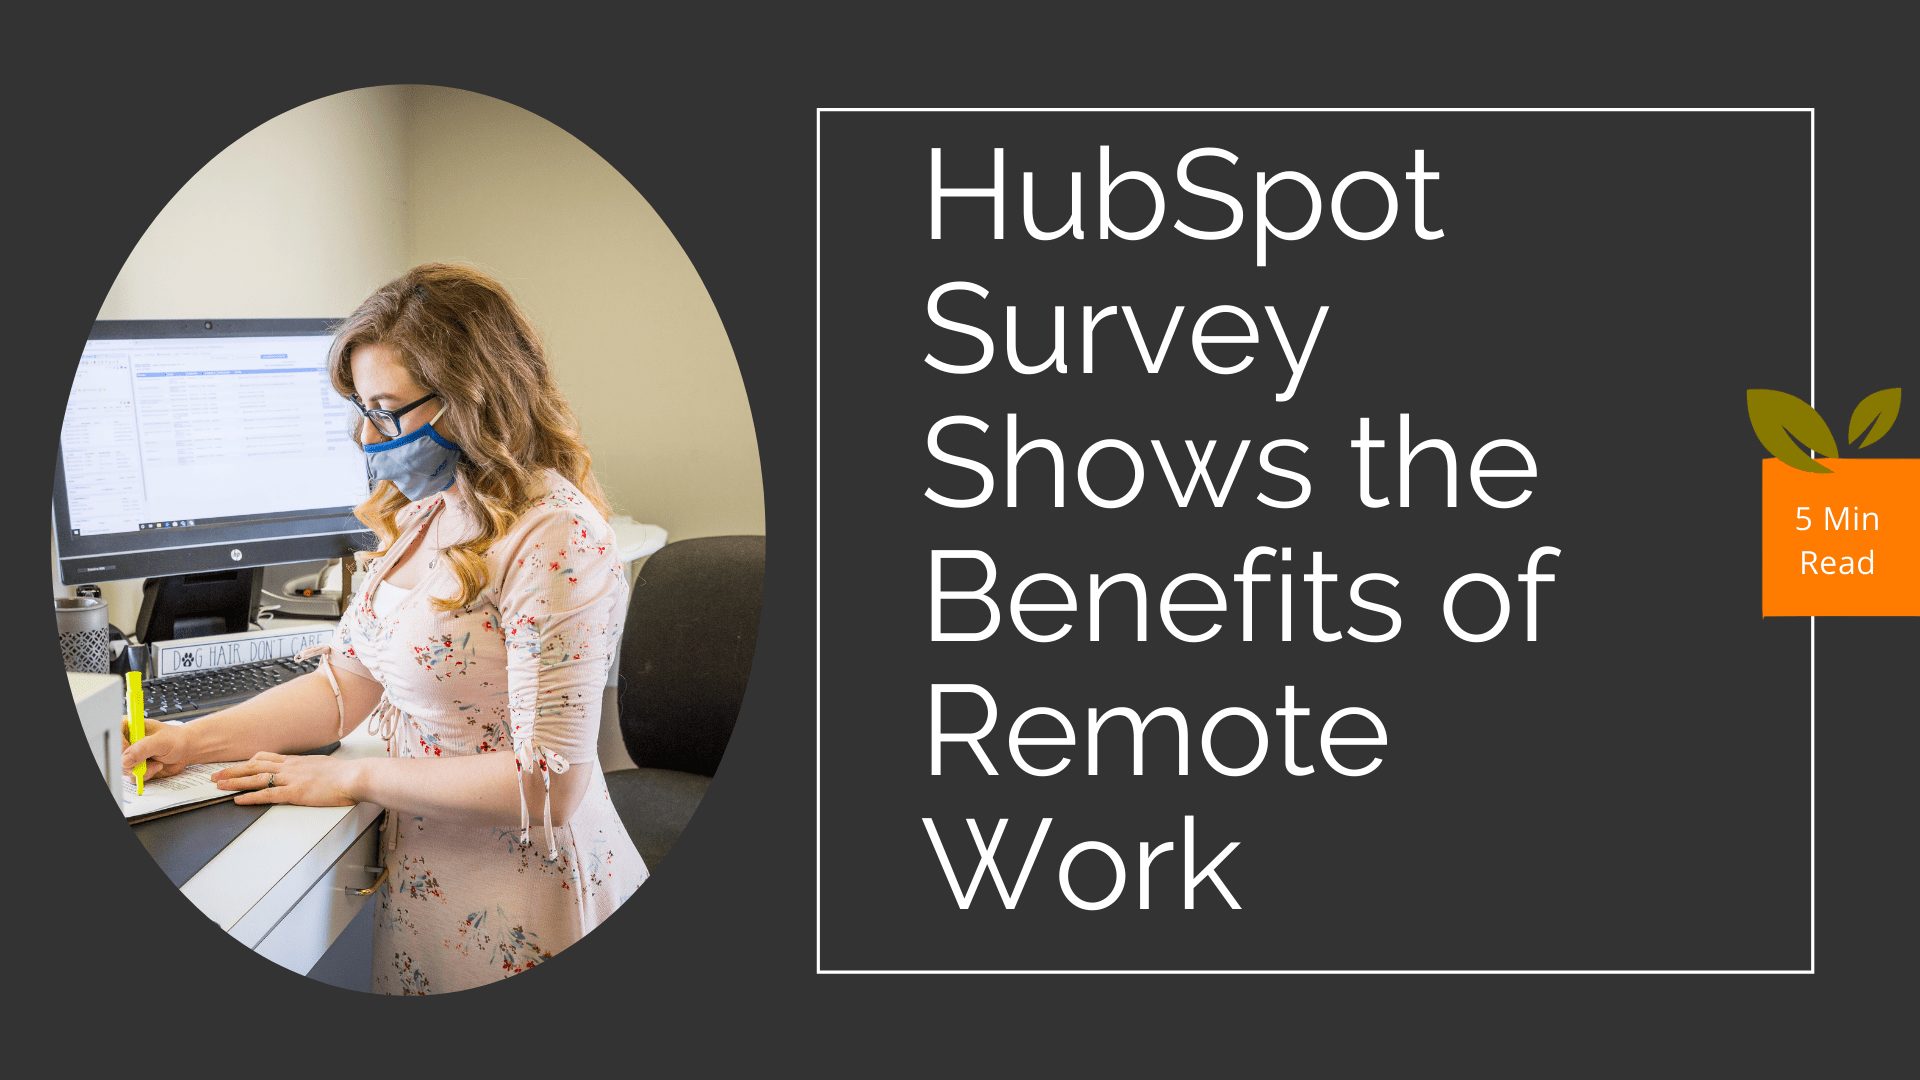 HubSpot Survey Shows the Benefits of Remote Work